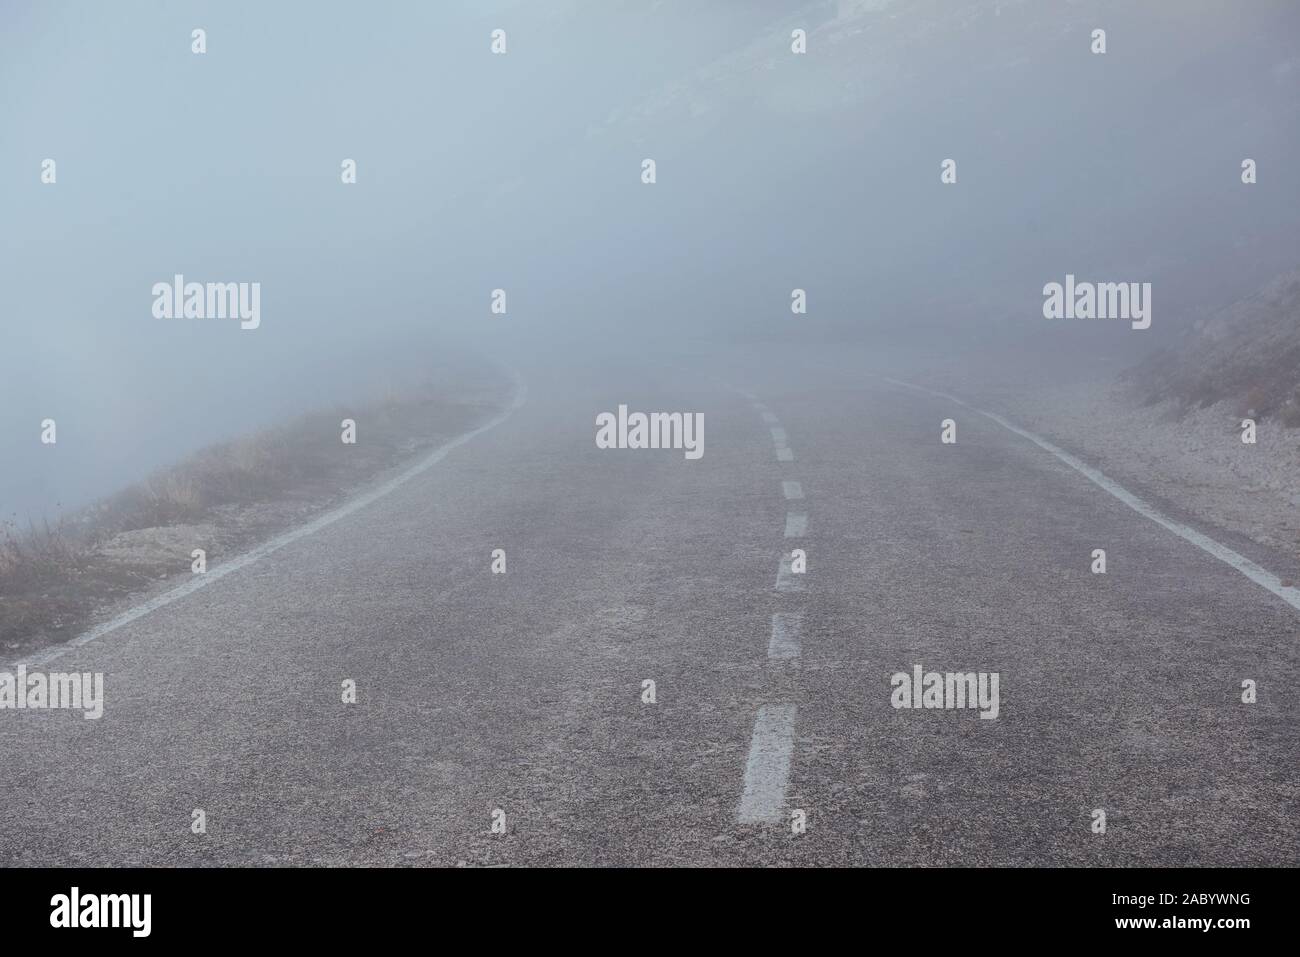 Mysterious looking road in the heavy fog near the mountains Stock Photo